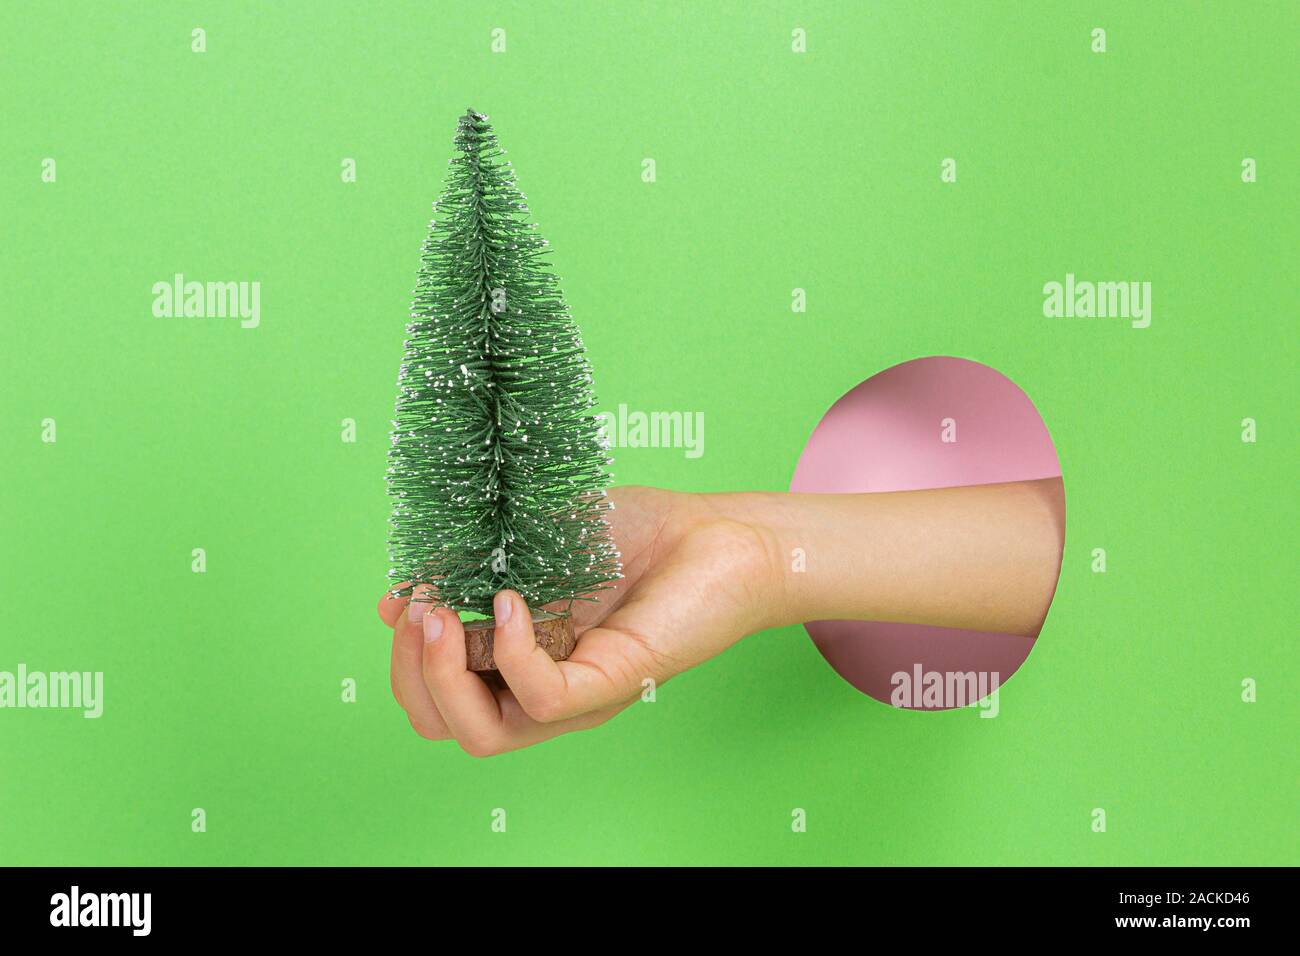 Kid holding decoration little green Christmas tree in hand through hole on light green background Stock Photo